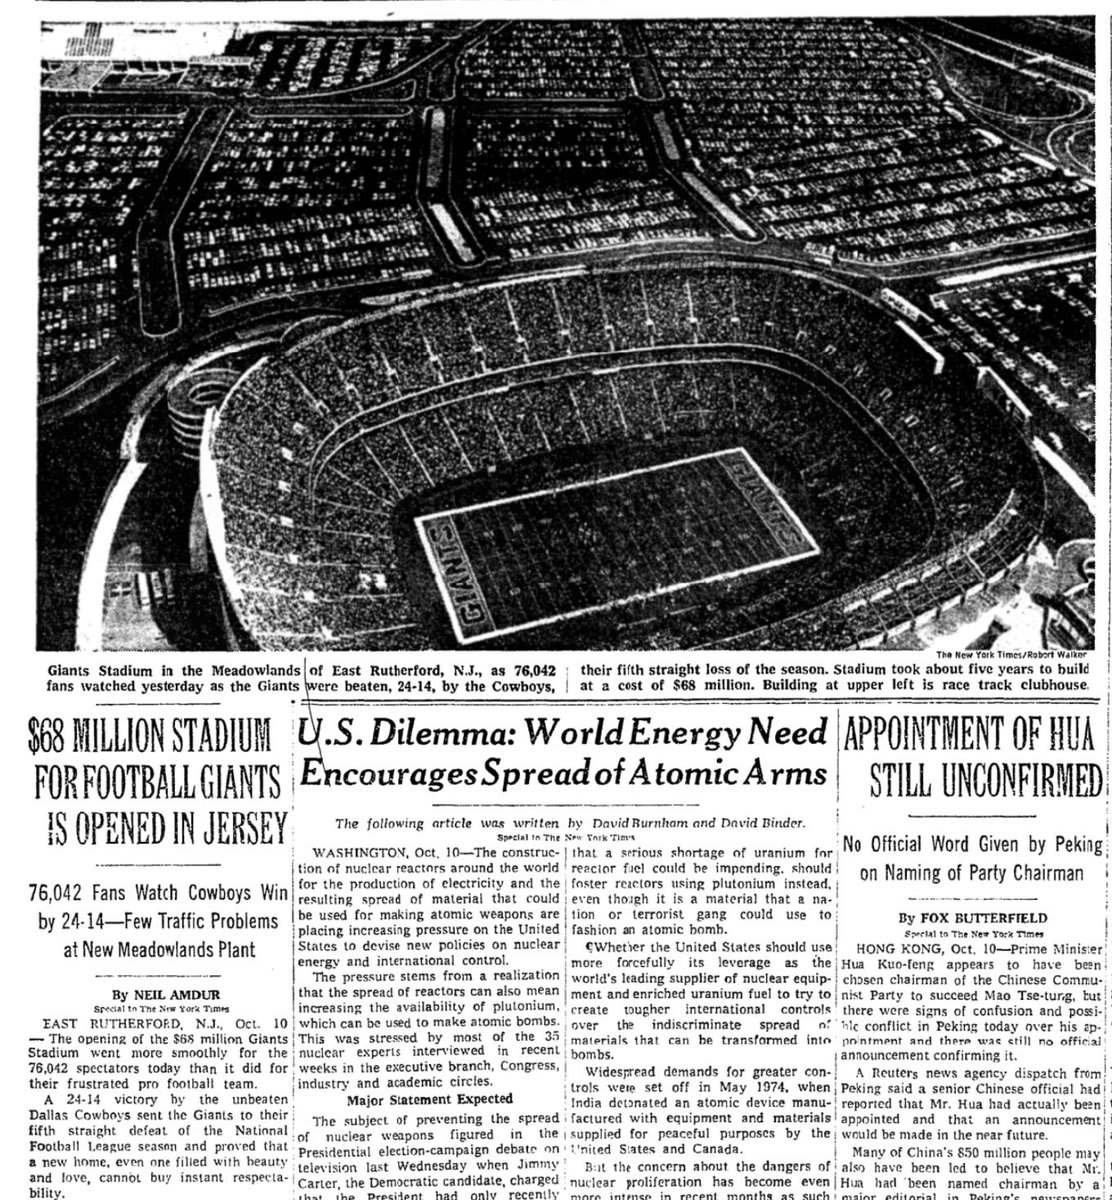 The $68 million Giants Stadium in East Rutherford, N.J., was opened on this day in 1976. The Giants were defeated by the Dallas Cowboys in the inaugural game played there.